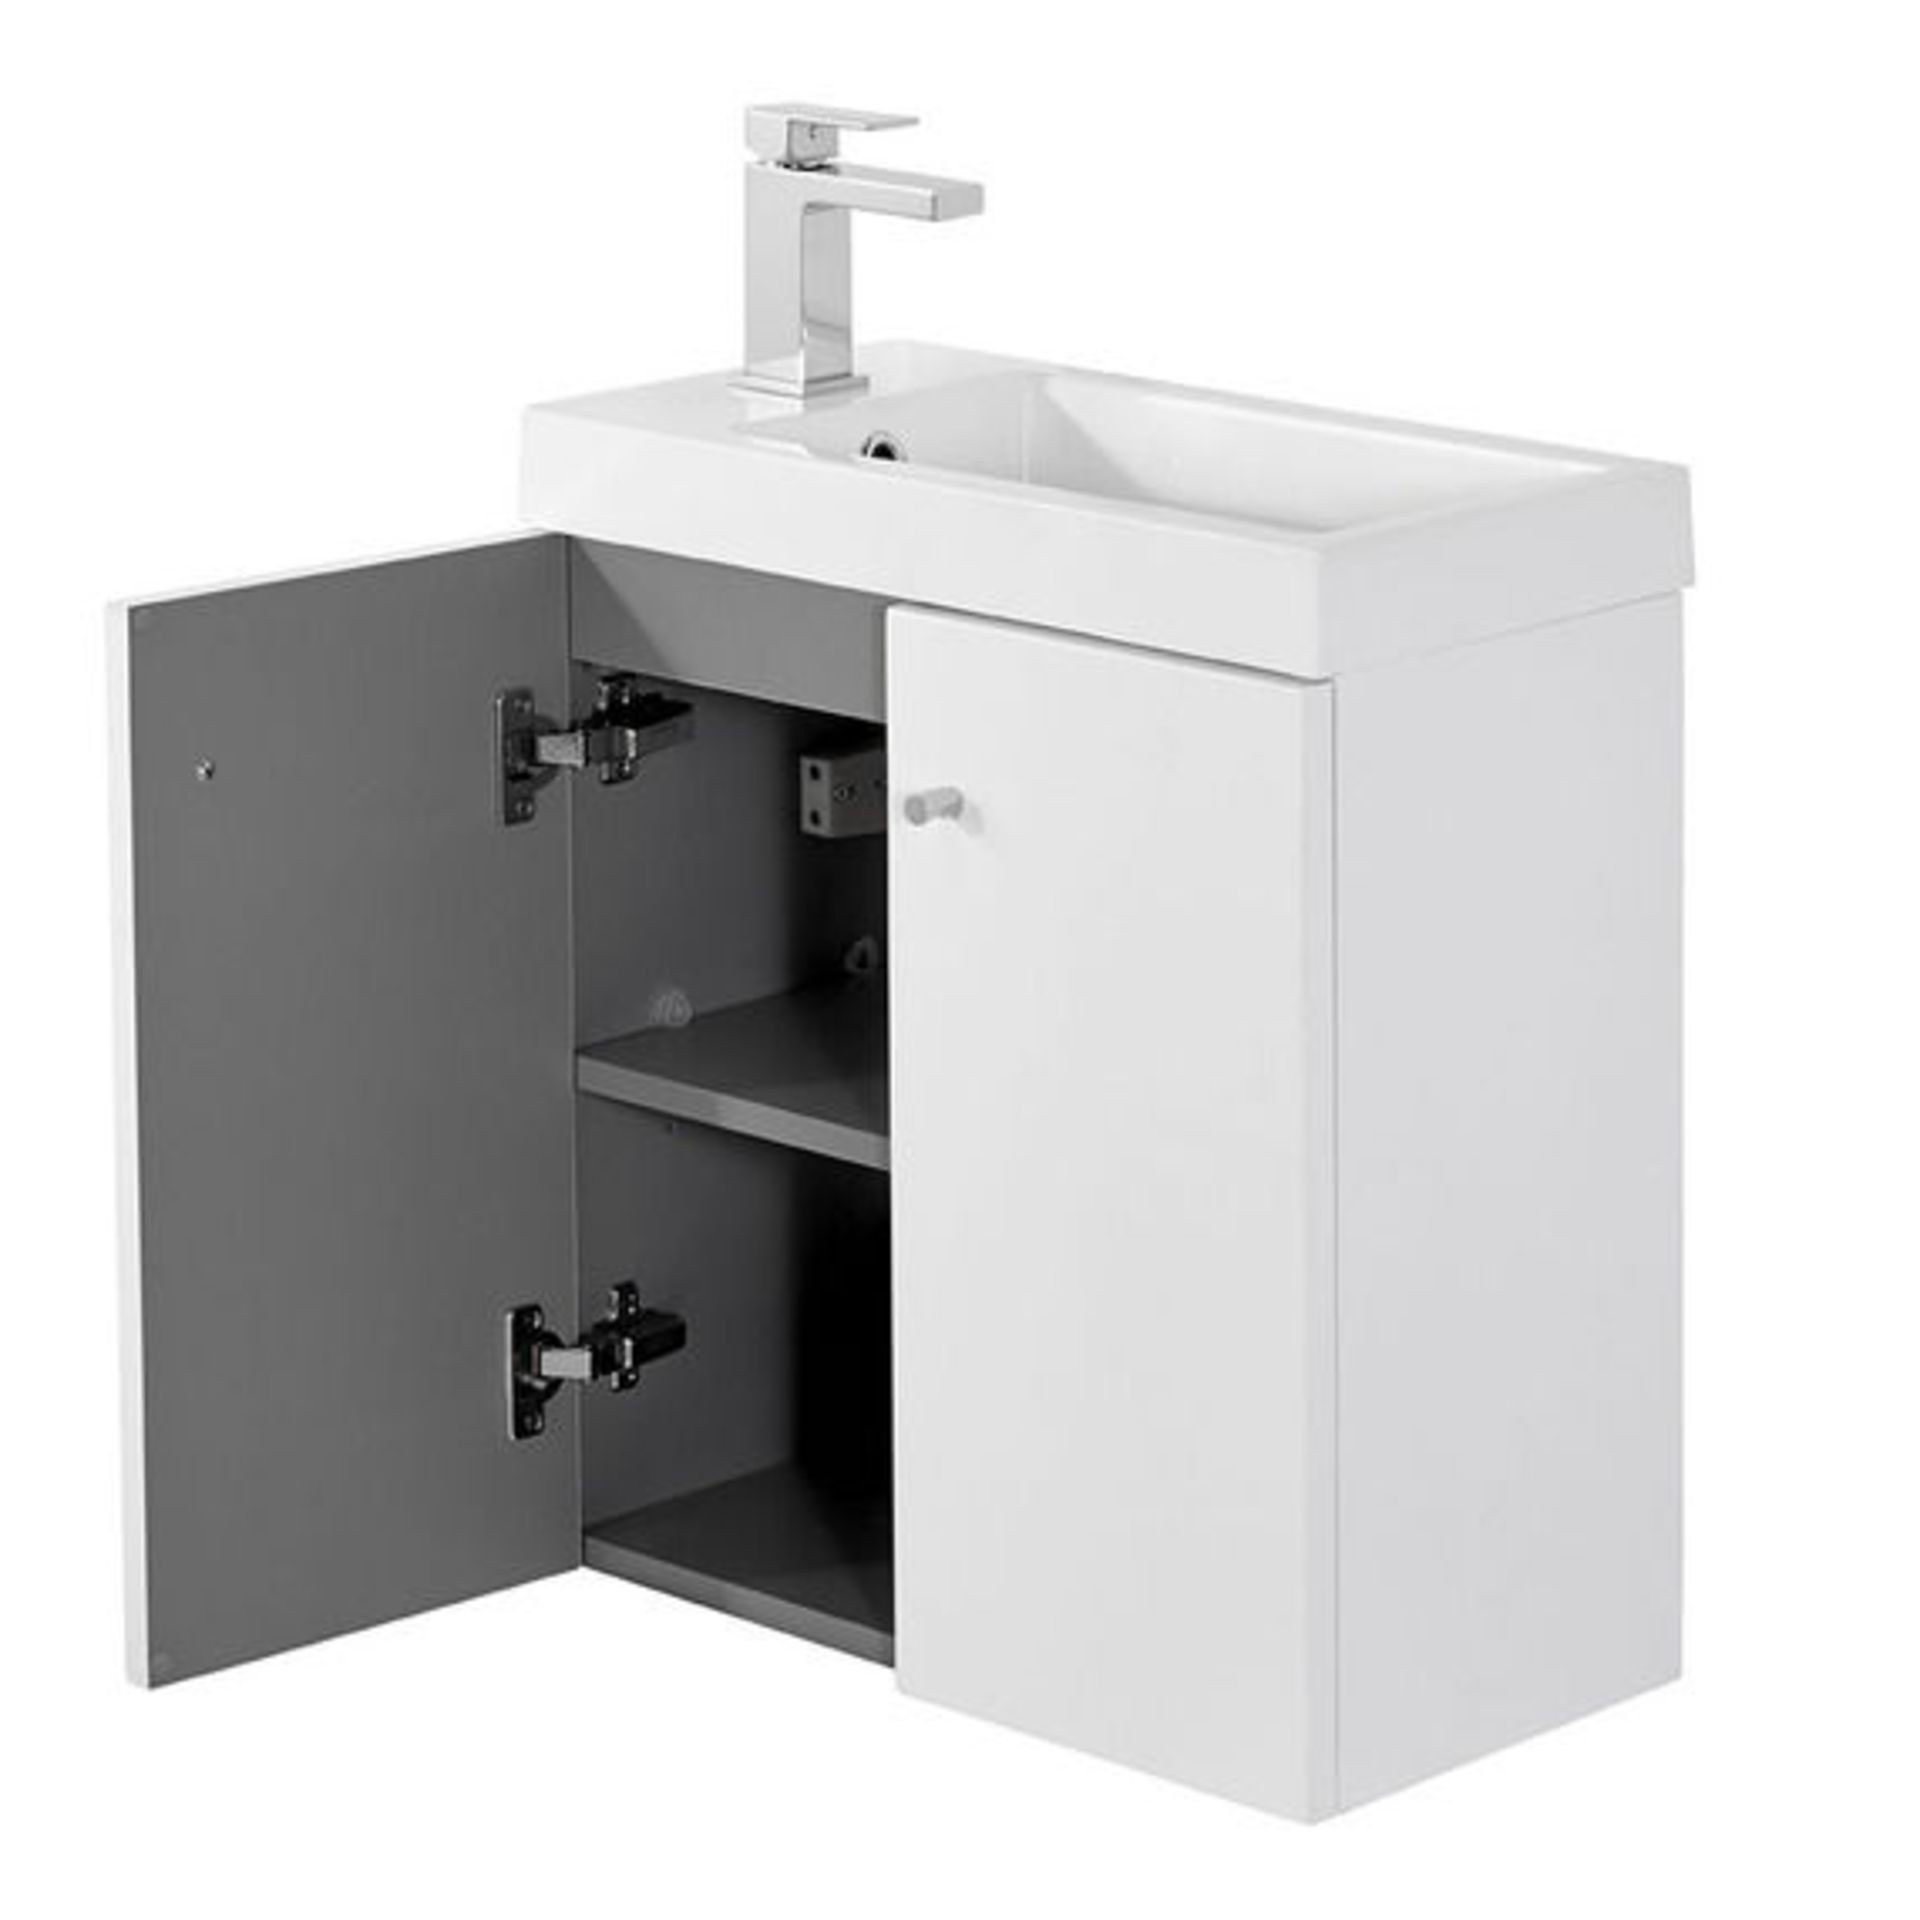 10 x Alpine Duo 495 Wall Hung Vanity Unit  - Gloss White - Brand New Boxed Stock - Dimensions: W49.5 - Image 2 of 4